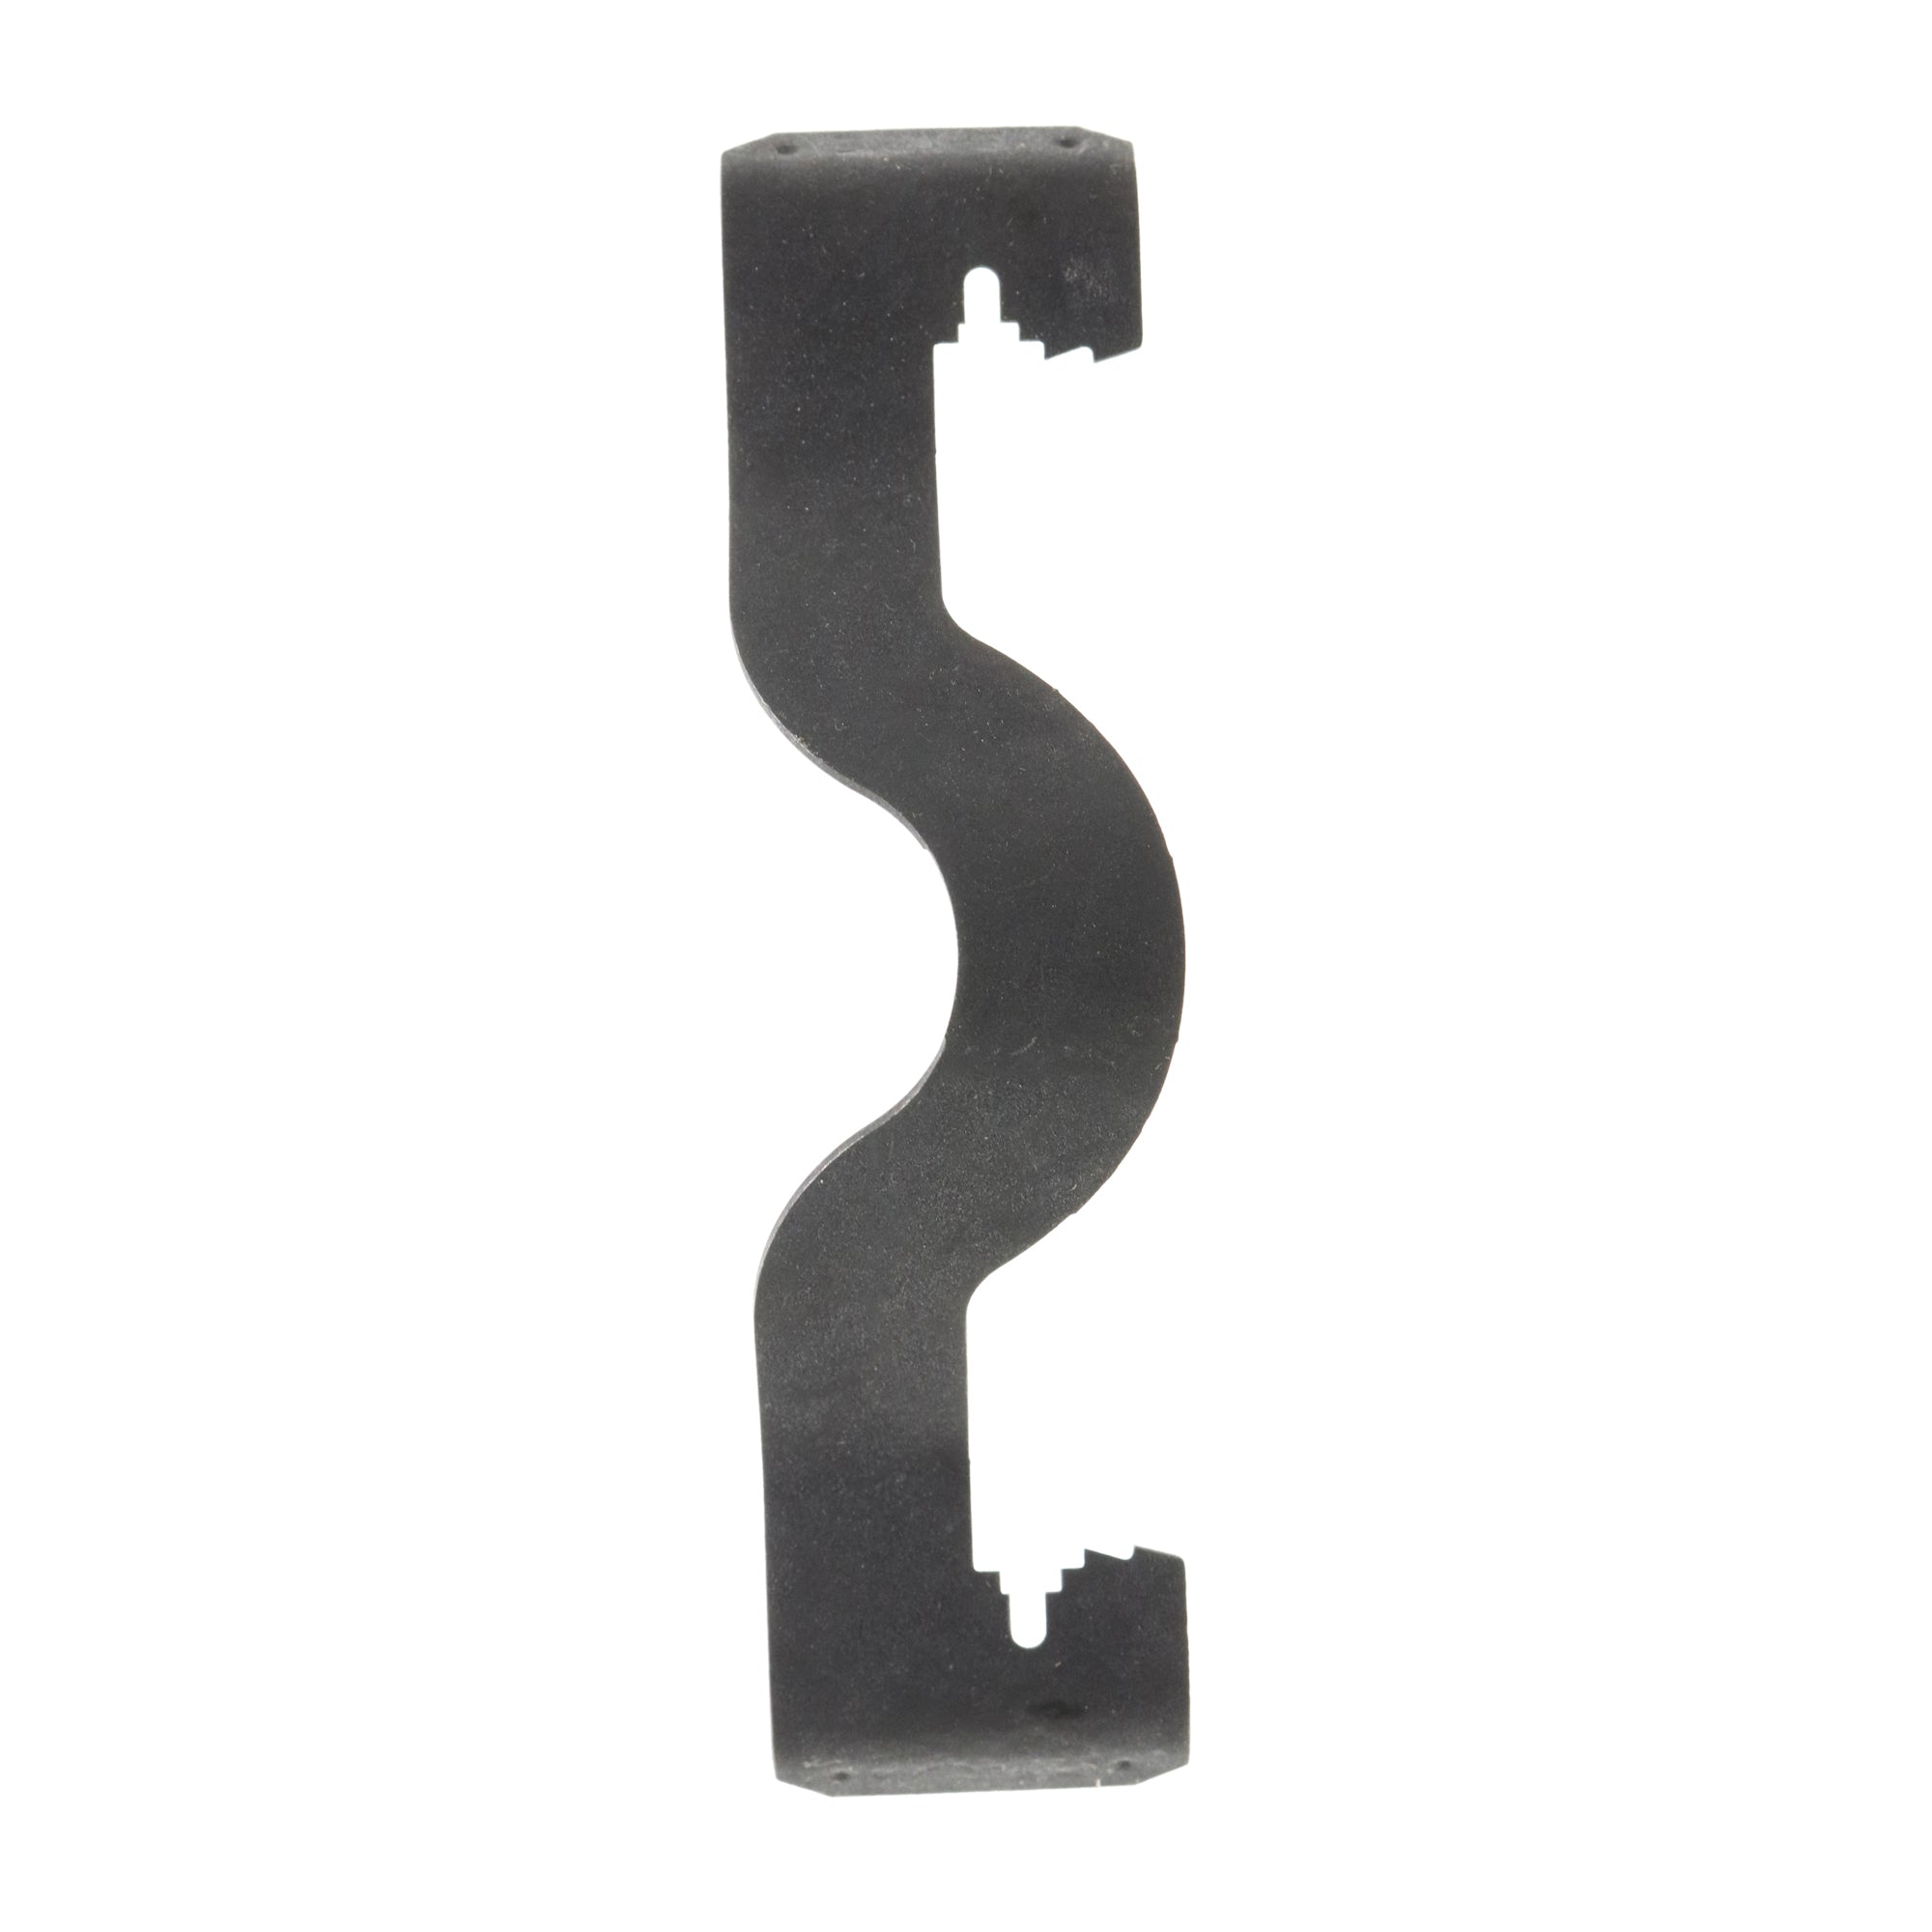 B-Line Systems, COOPER B-LINE BW-12 WING CLIP ROD OR WIRE FASTENER, 1/2" - 3/4", (100-PACK)